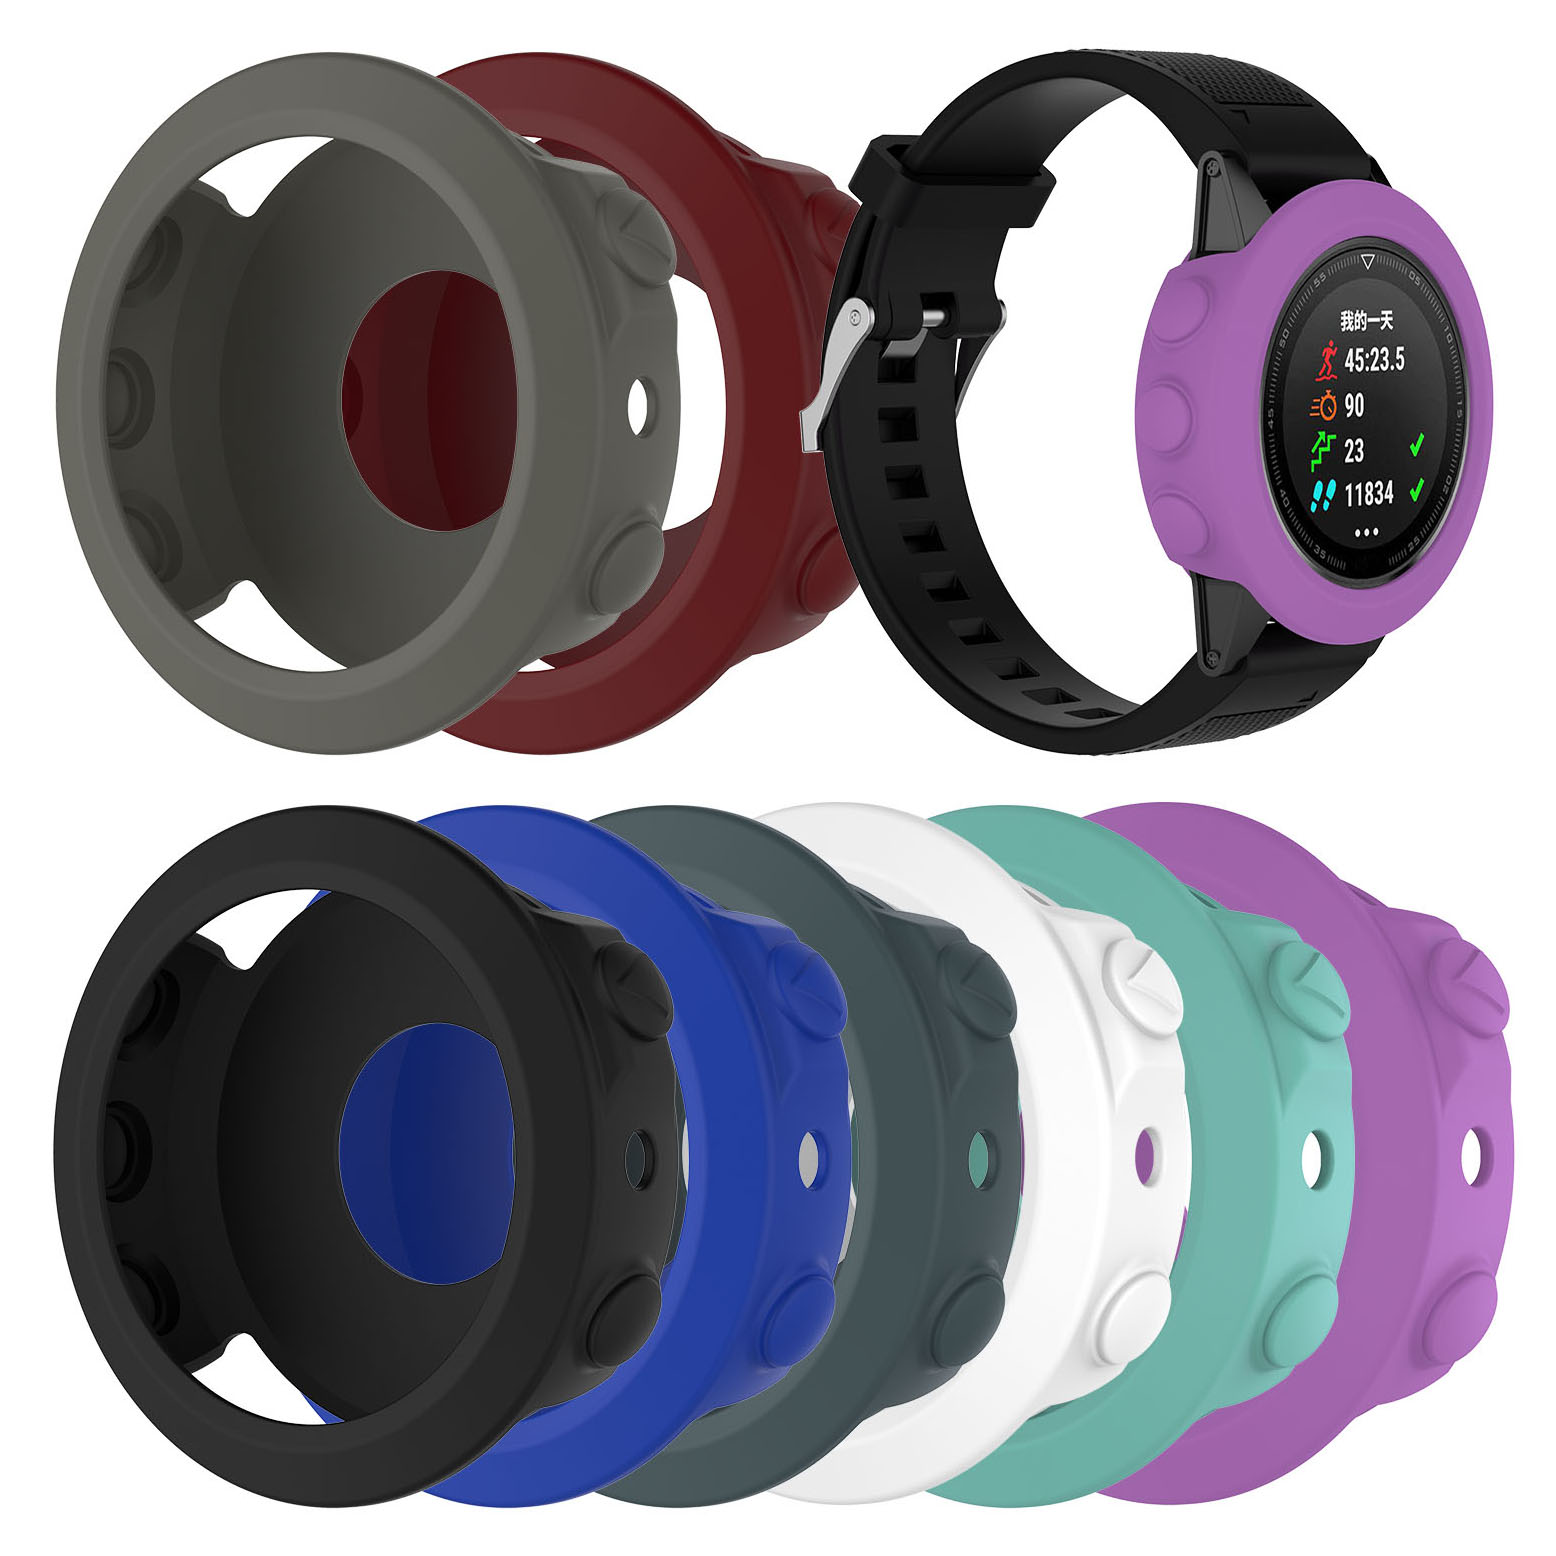 Find Bakeey Anti Scratch Shockproof Soft Silicone Watch Case Cover for Garmin Fenix 5S / Fenix 5 / Fenix 5X for Sale on Gipsybee.com with cryptocurrencies